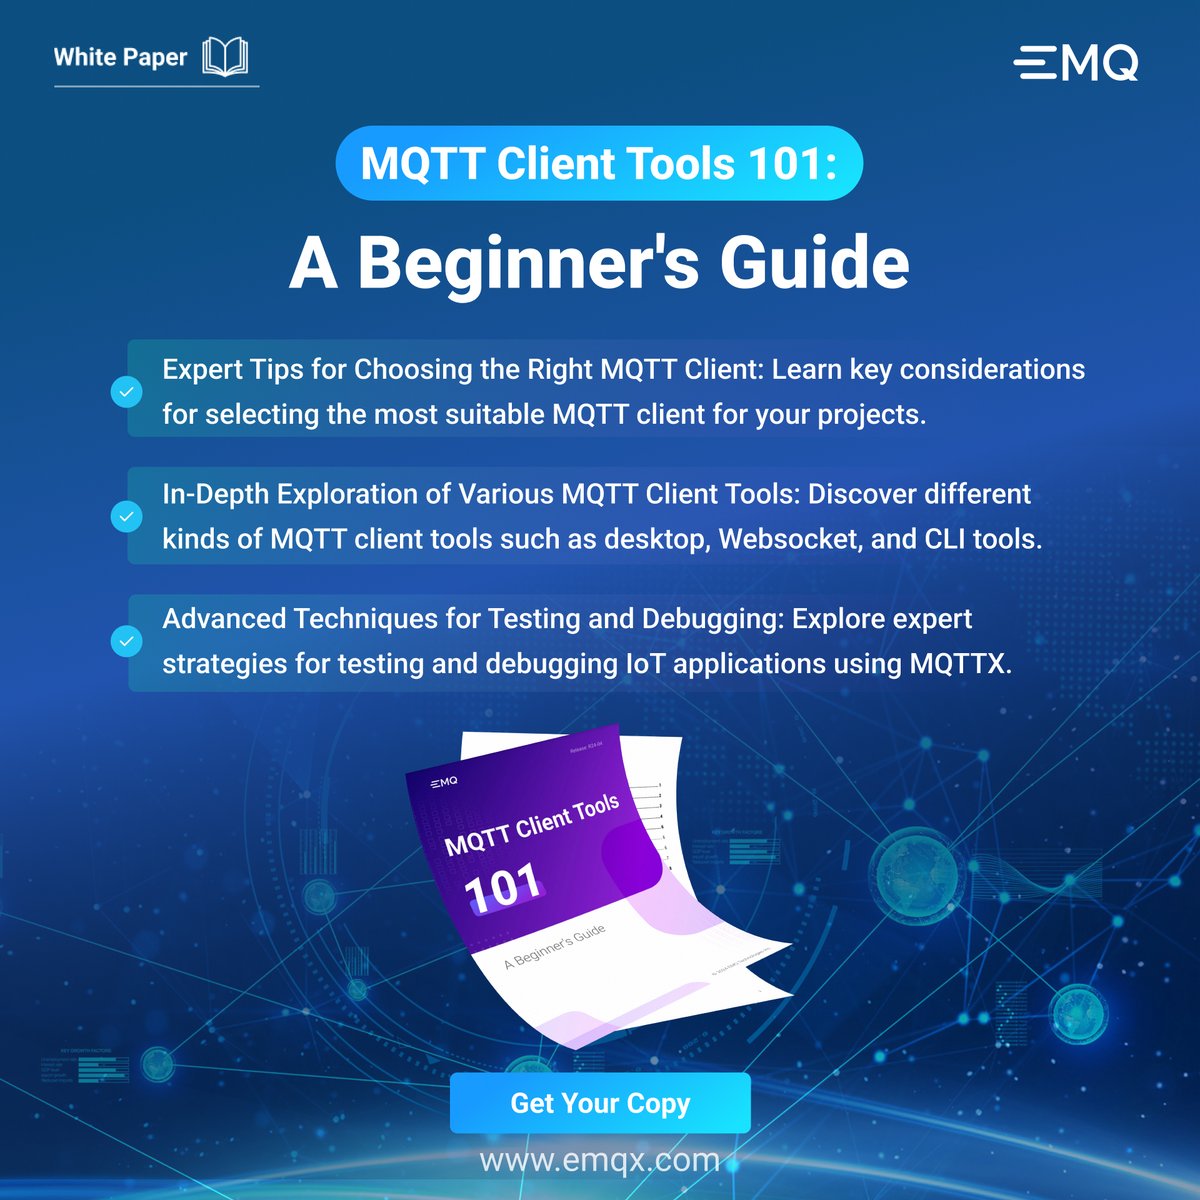 📘 Get our new eBook, 'MQTT Client Tools 101'. Expand your MQTT knowledge with expert advice, MQTT tools guide, and advanced techniques using MQTTX!

Grab your free copy now! ➡️ shorturl.at/DSX89

#eBook #MQTT #IoTProjects #MQTTTools #Learning social.emqx.com/u/2xBaMA